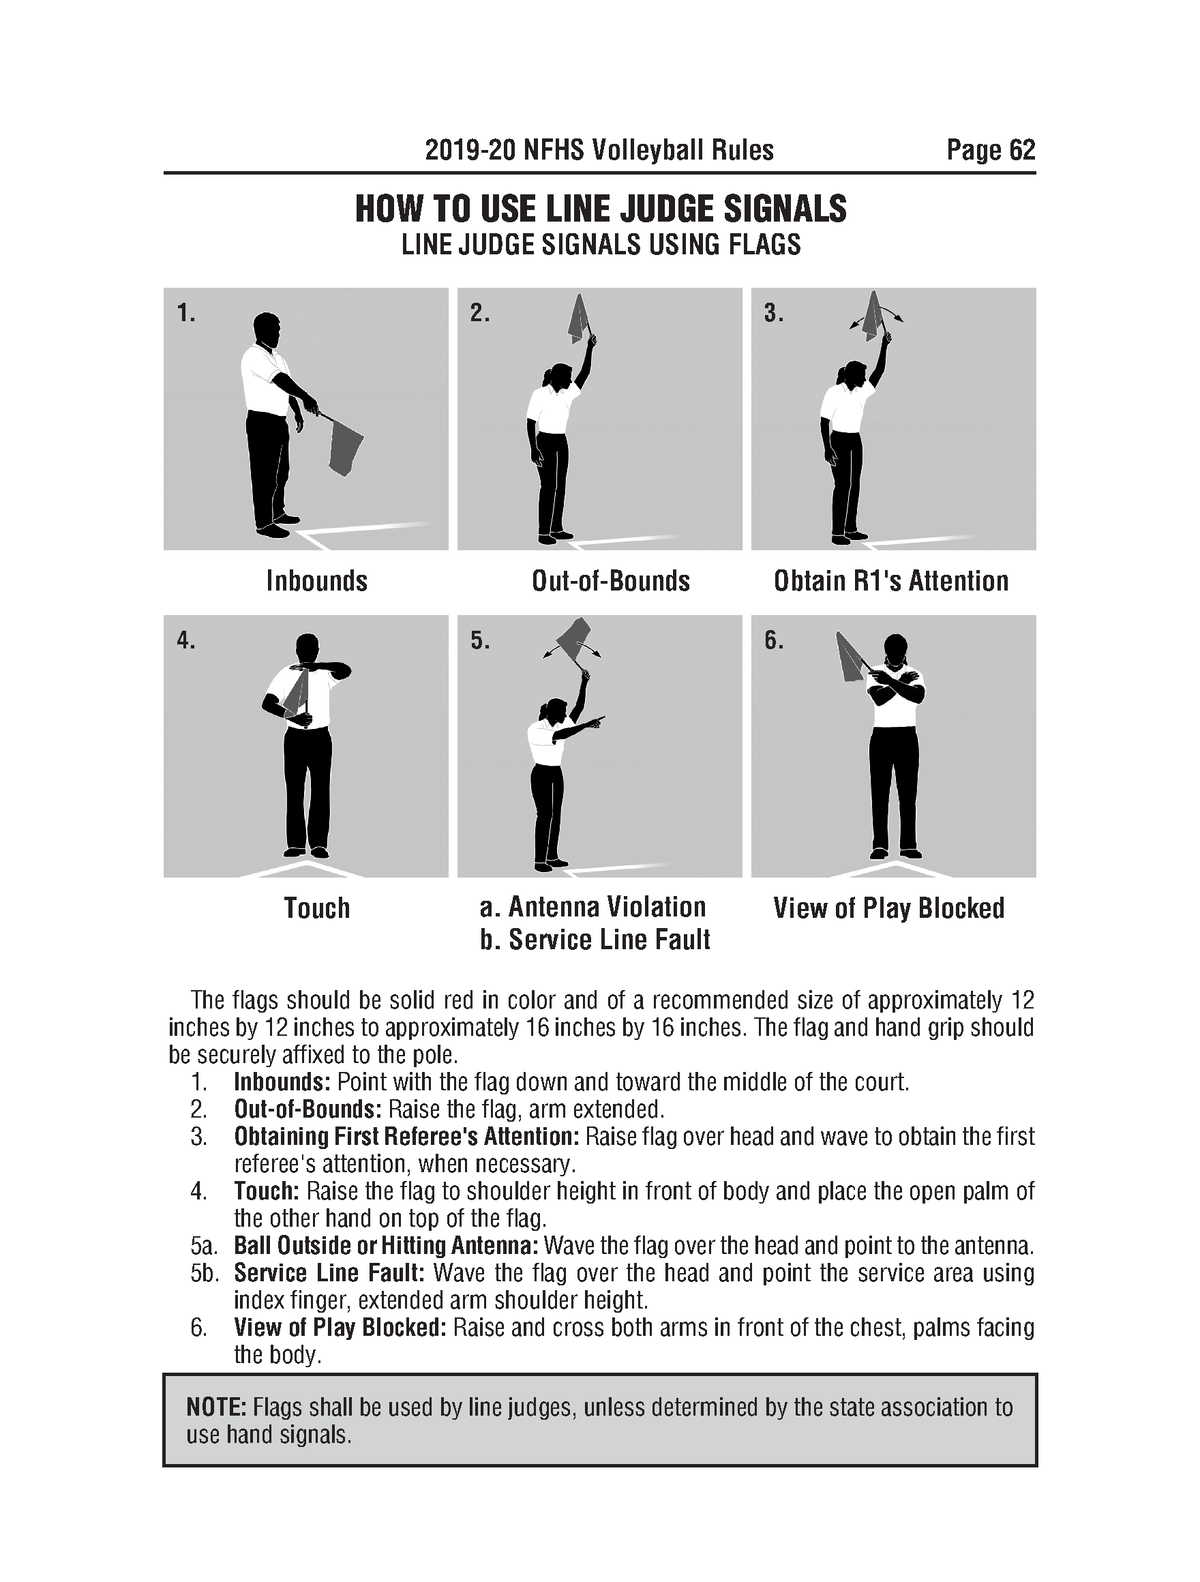 2019 20 line judge signals Page 62 201920 NFHS Volleyball Rules